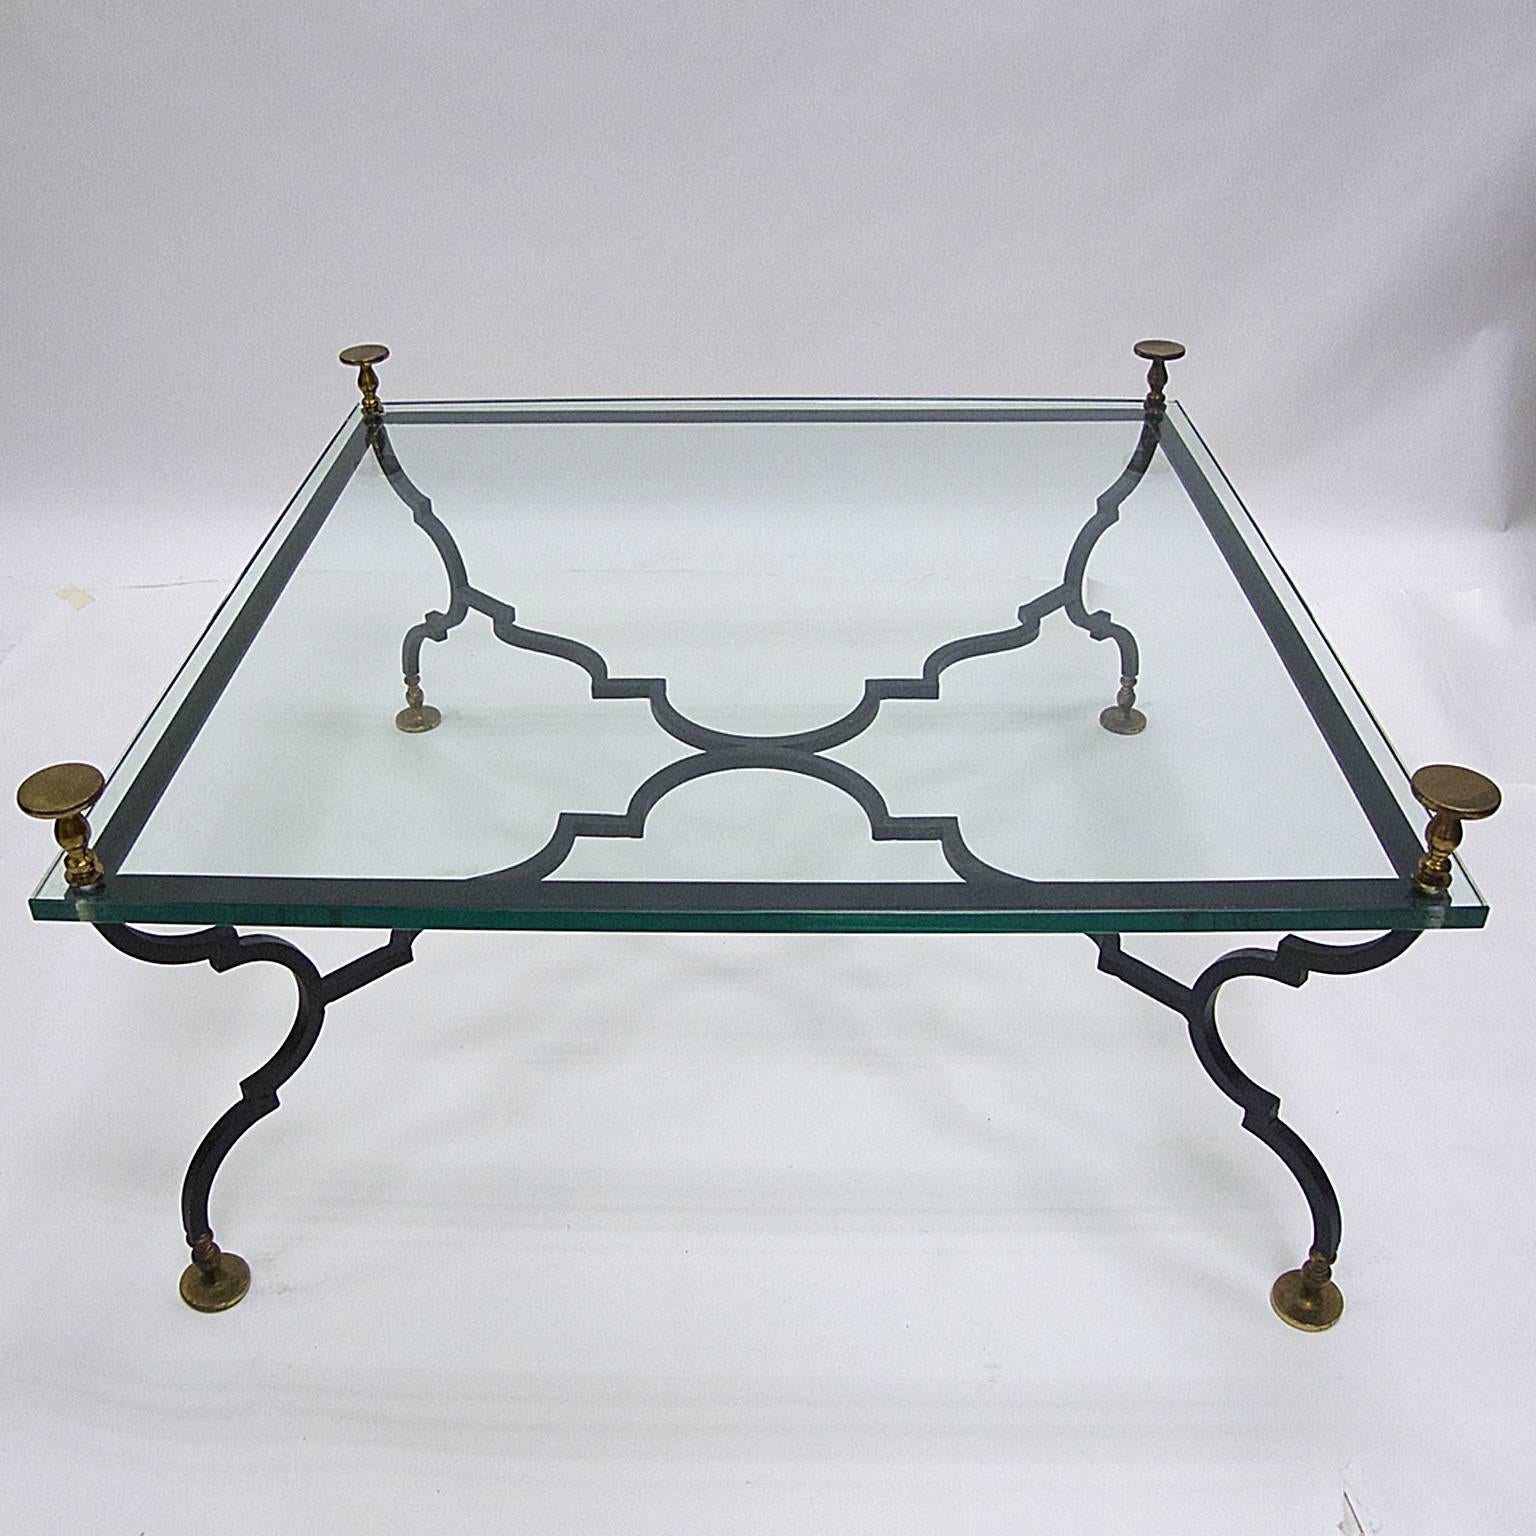 North American Maison Jansen Heavy French Decorative Coffee Table Neoclassical Style